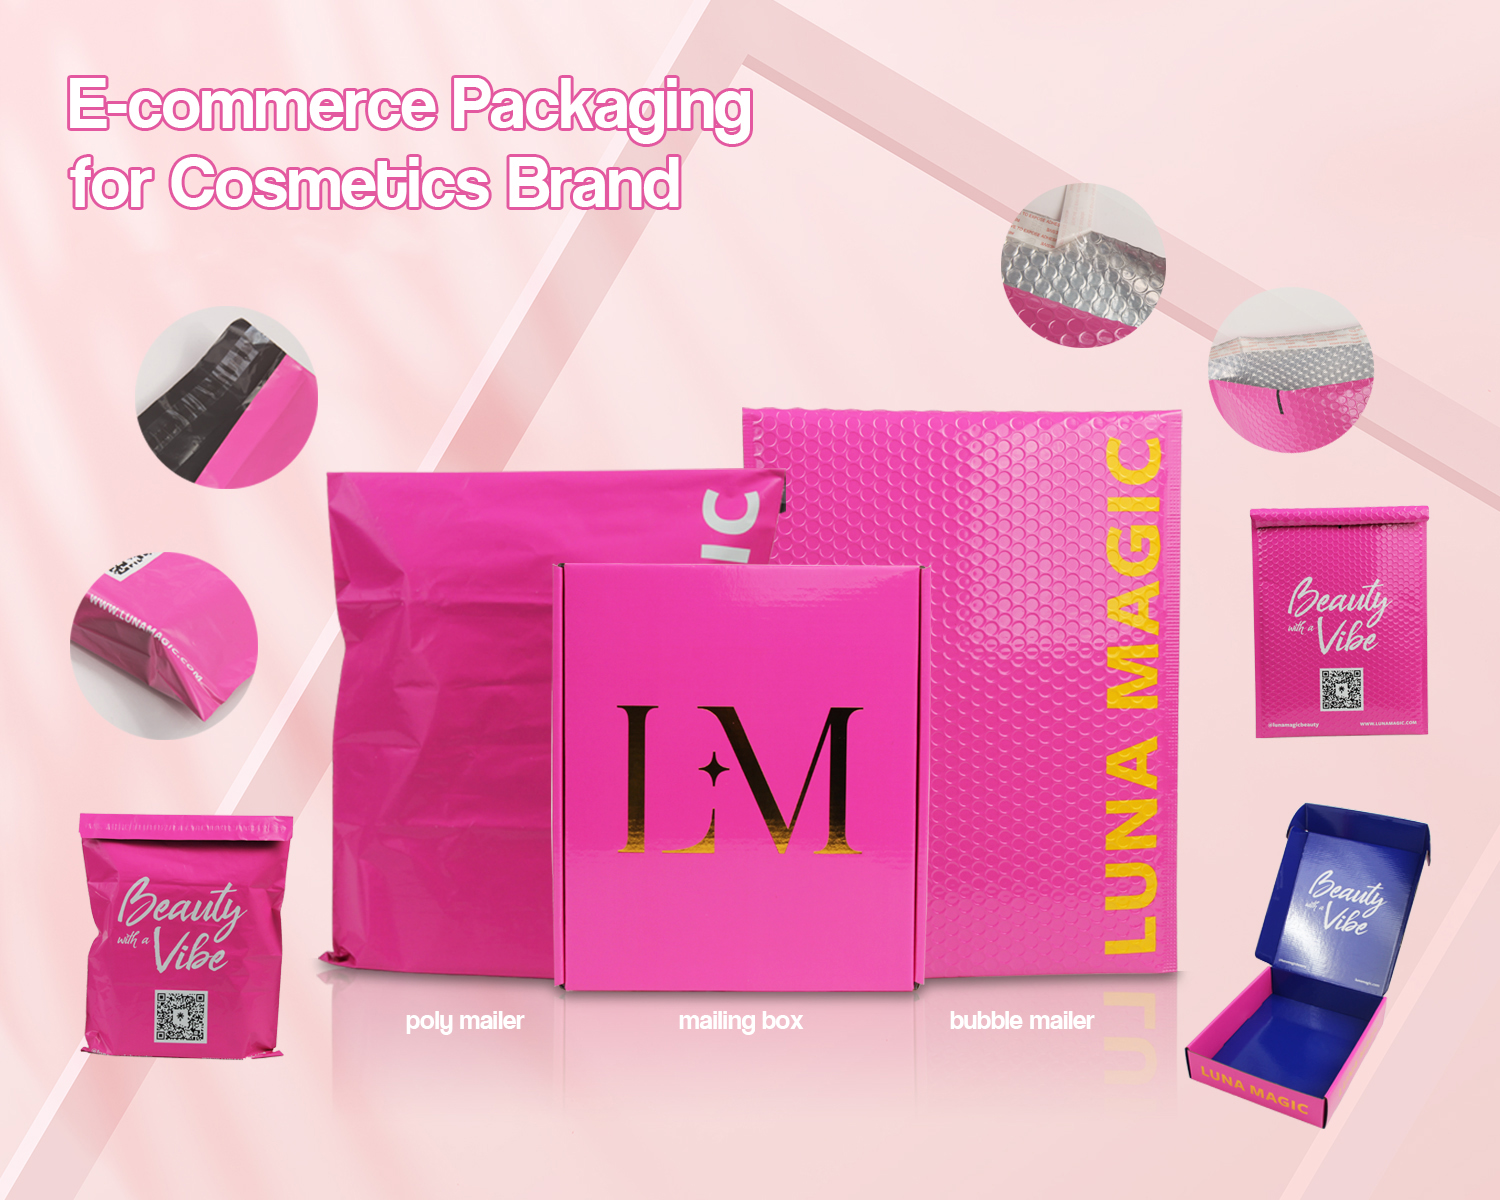 How to Create an Unforgettable Unboxing Experience for Consumers? -- E-commerce Packaging Strategies for Cosmetics Brands (1)